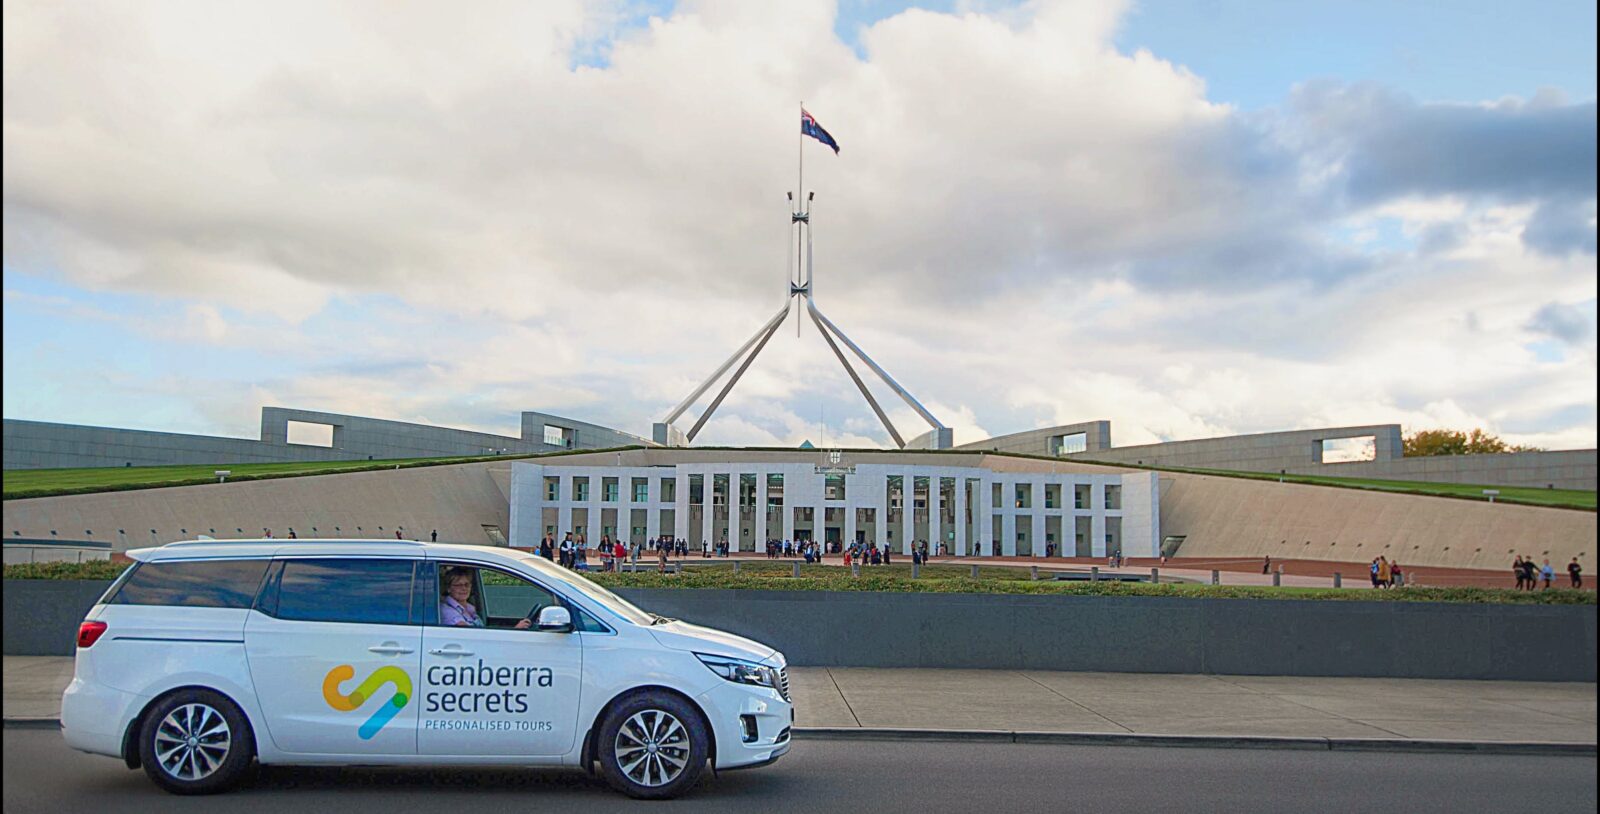 Canberra secrets vehicle in front of Parliament House